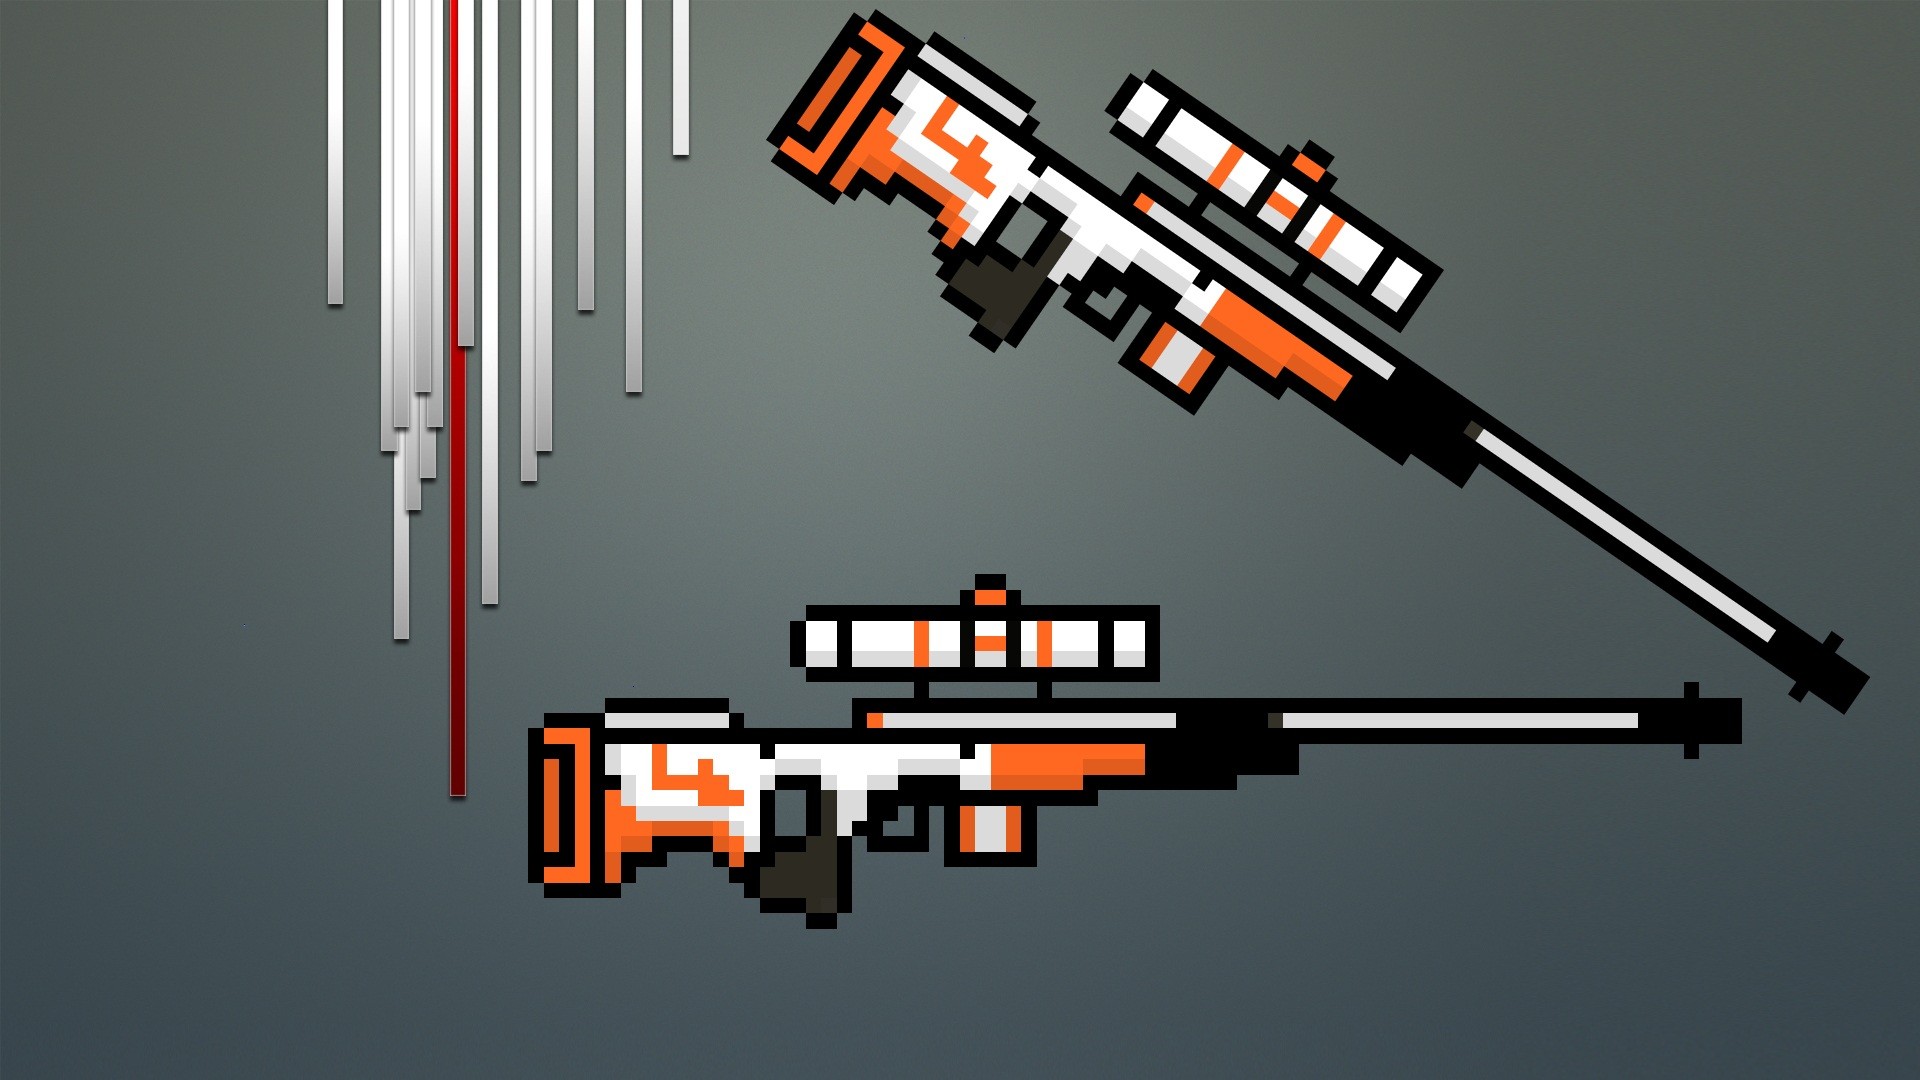 Awp Asiimov Information Csgo I Got The Idea From There Its